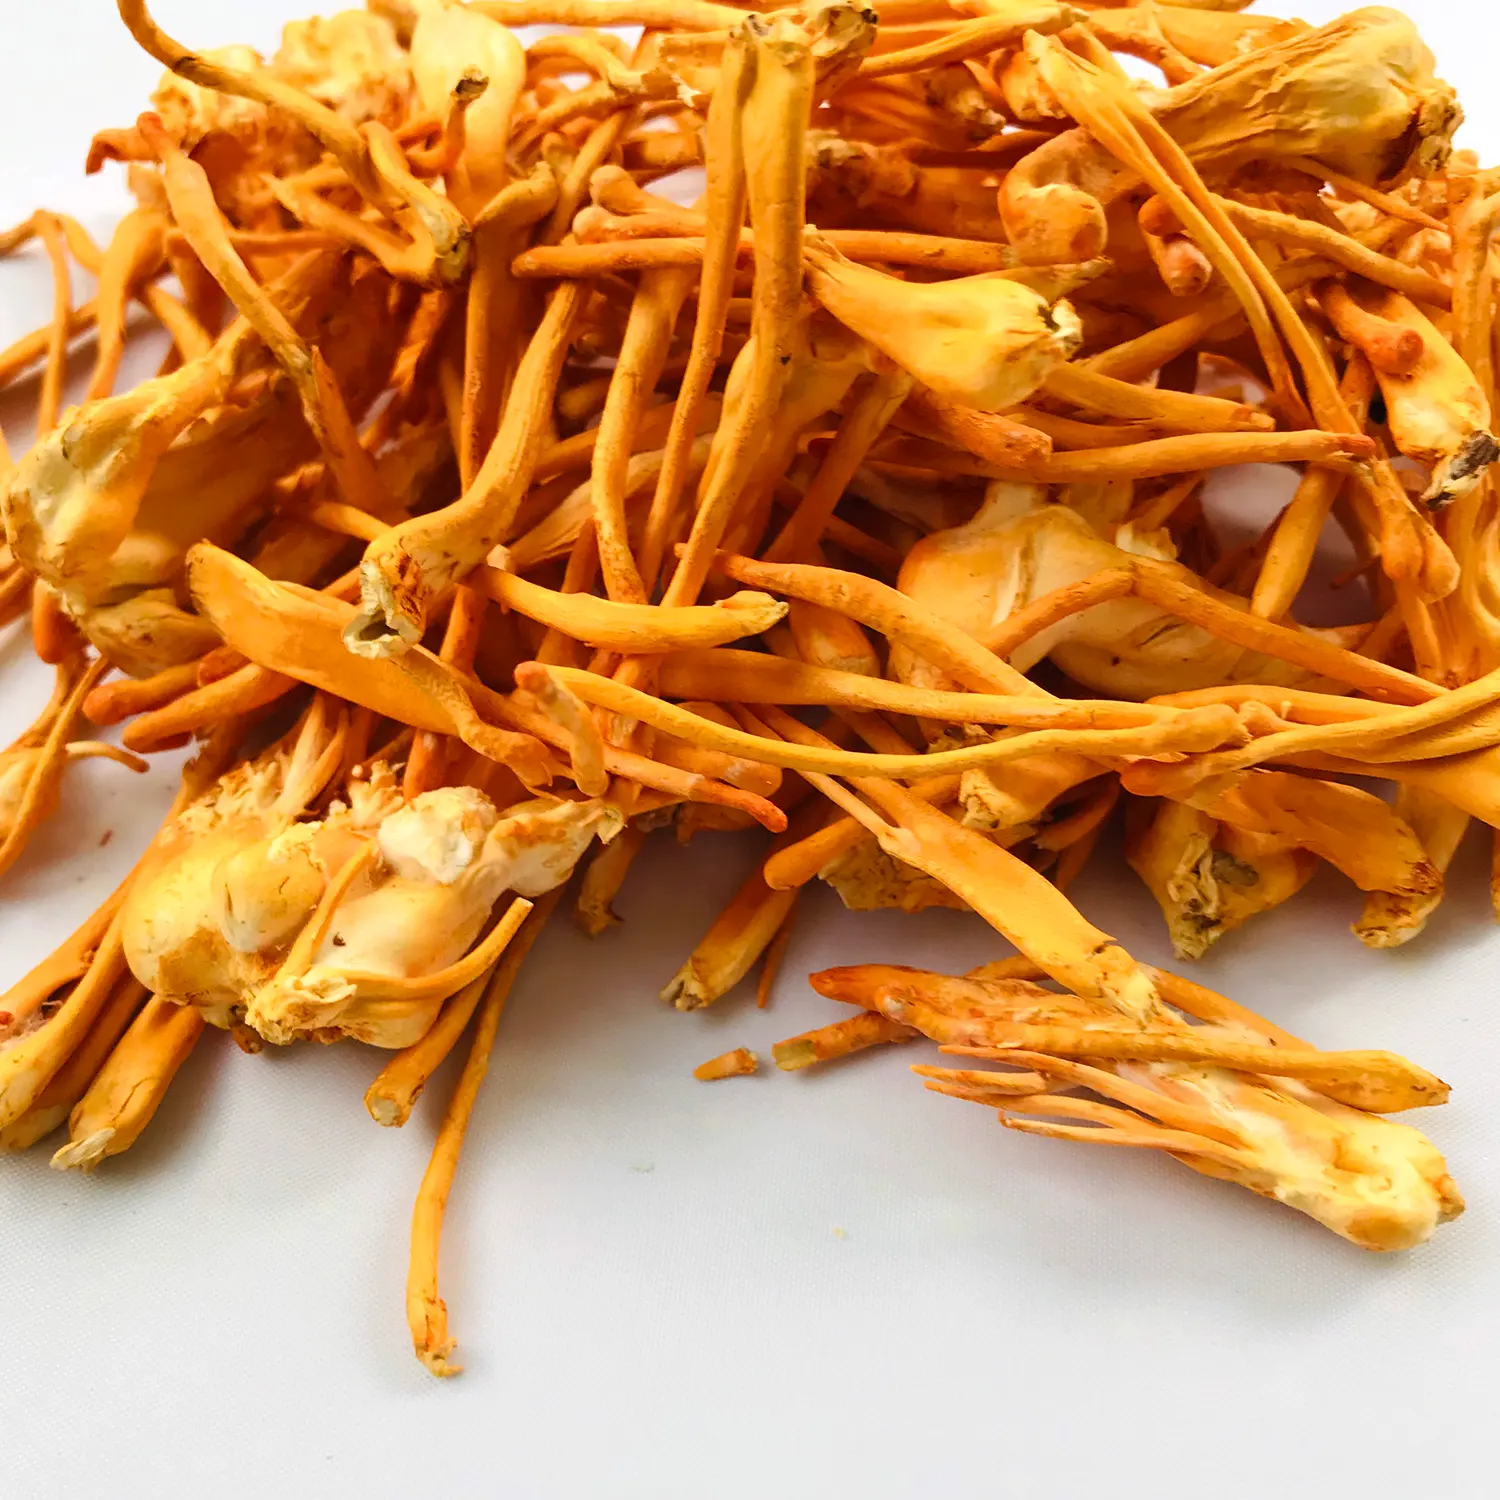 Cordyceps Militaris Healthy Product 100% Natural Herbal High Quality Product Good For Health Providing Energy